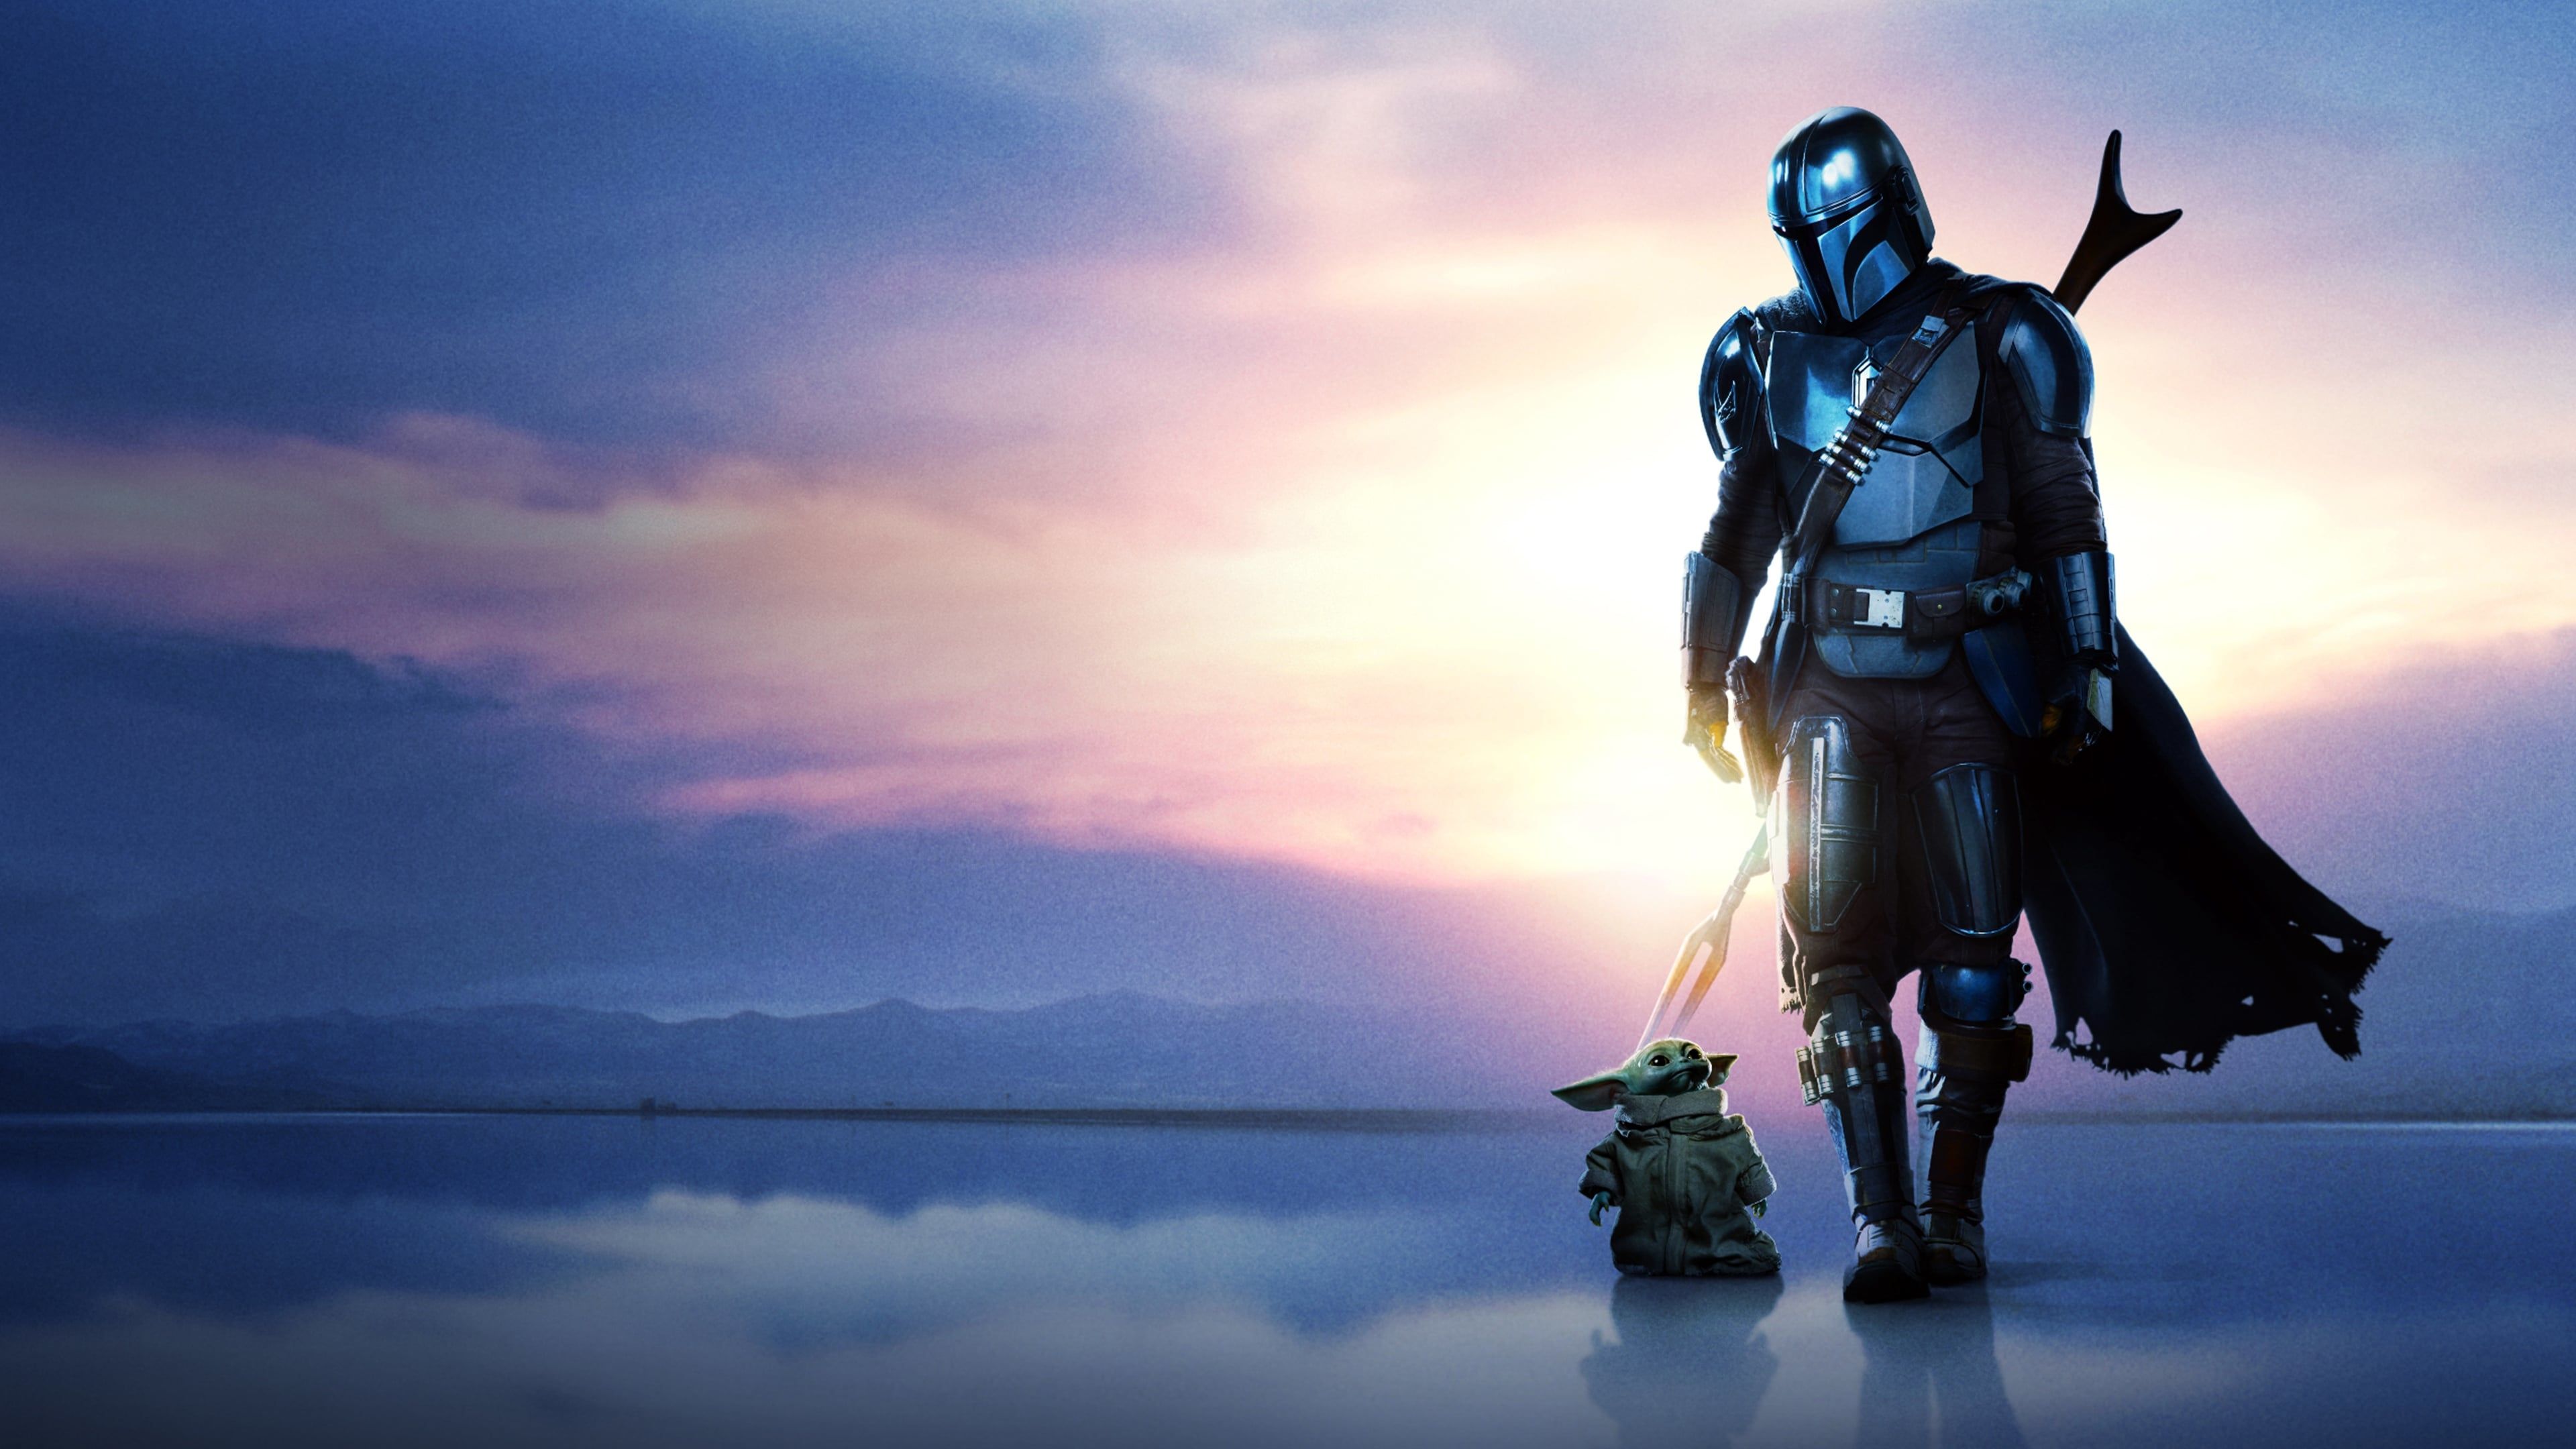 The Mandalorian and The Child Wallpaper, HD TV Series 4K Wallpaper, Image, Photo and Background